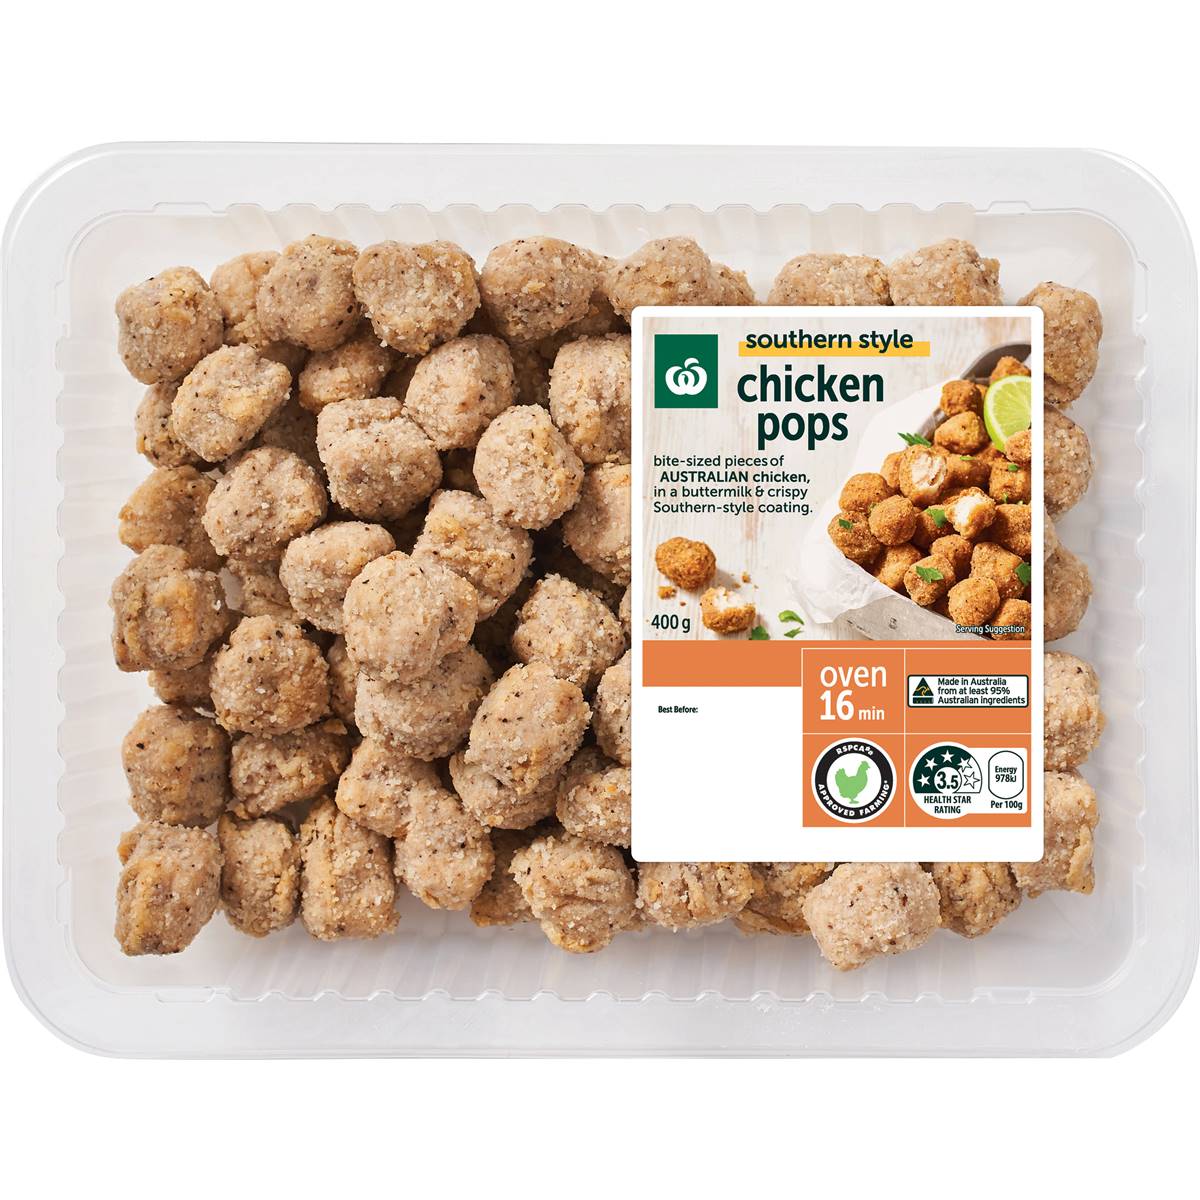 Calories in Woolworths Southern Style Chicken Pops